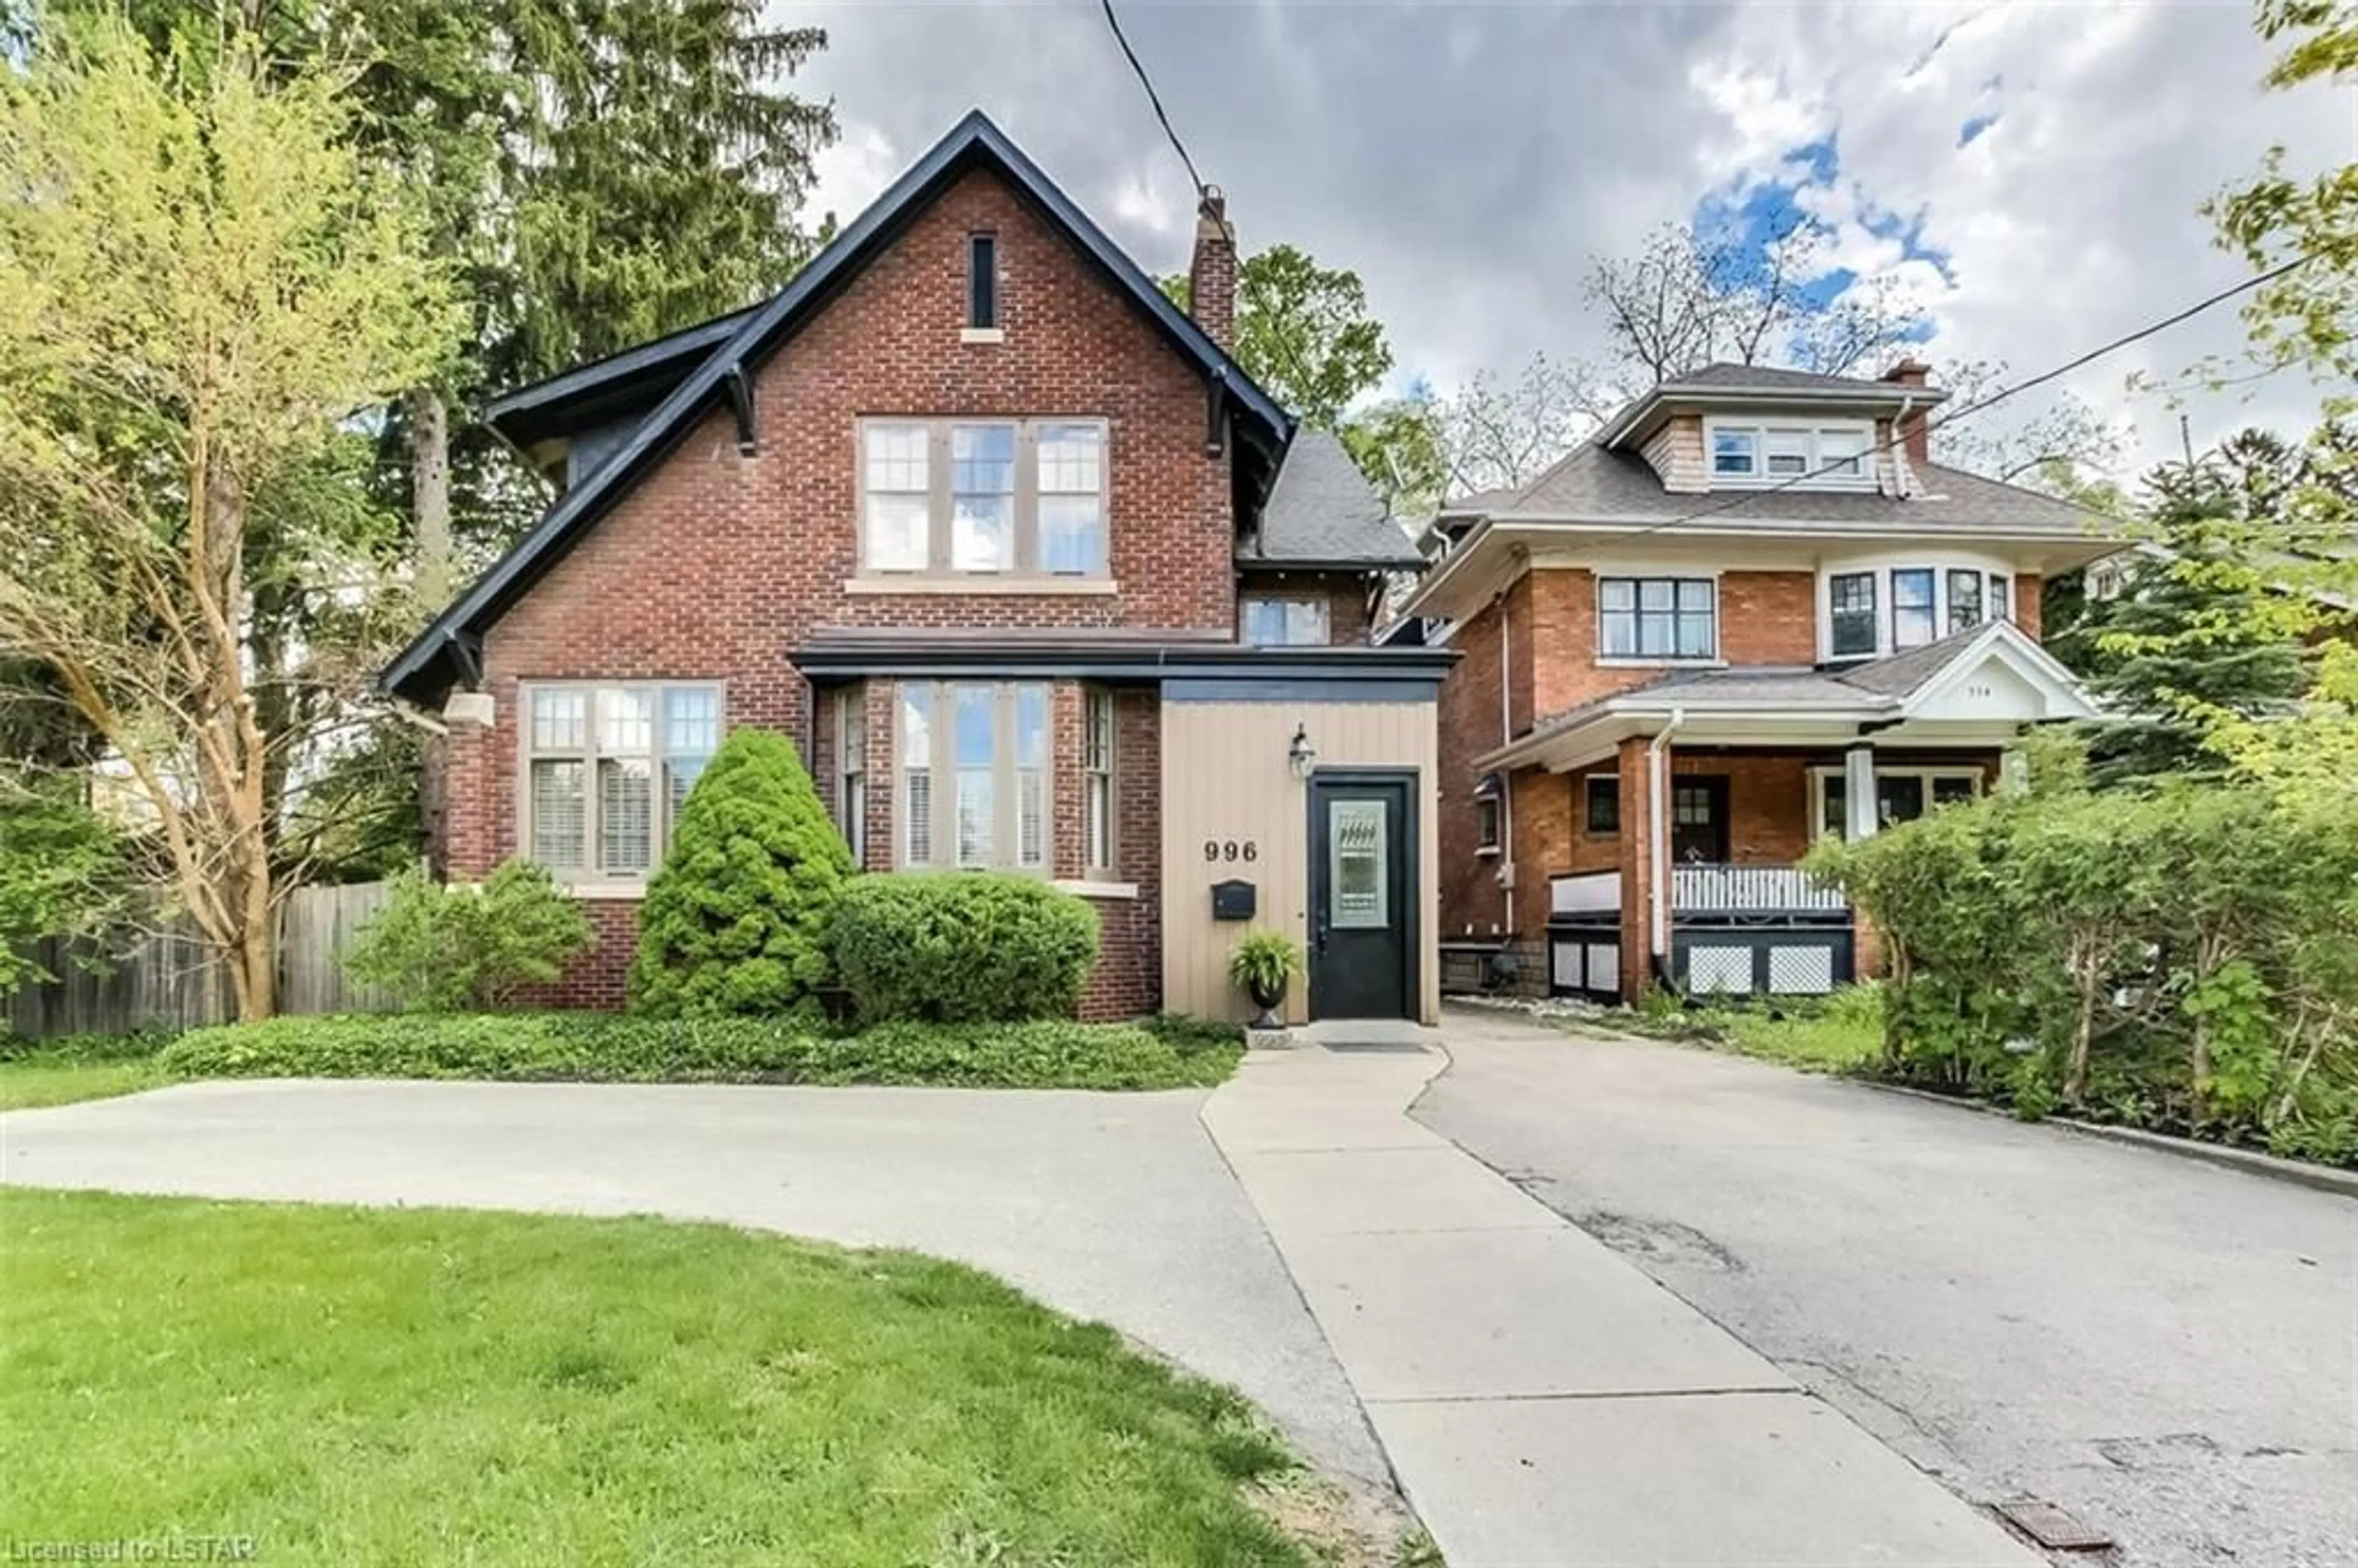 Frontside or backside of a home for 996 Richmond St, London Ontario N6A 3J5